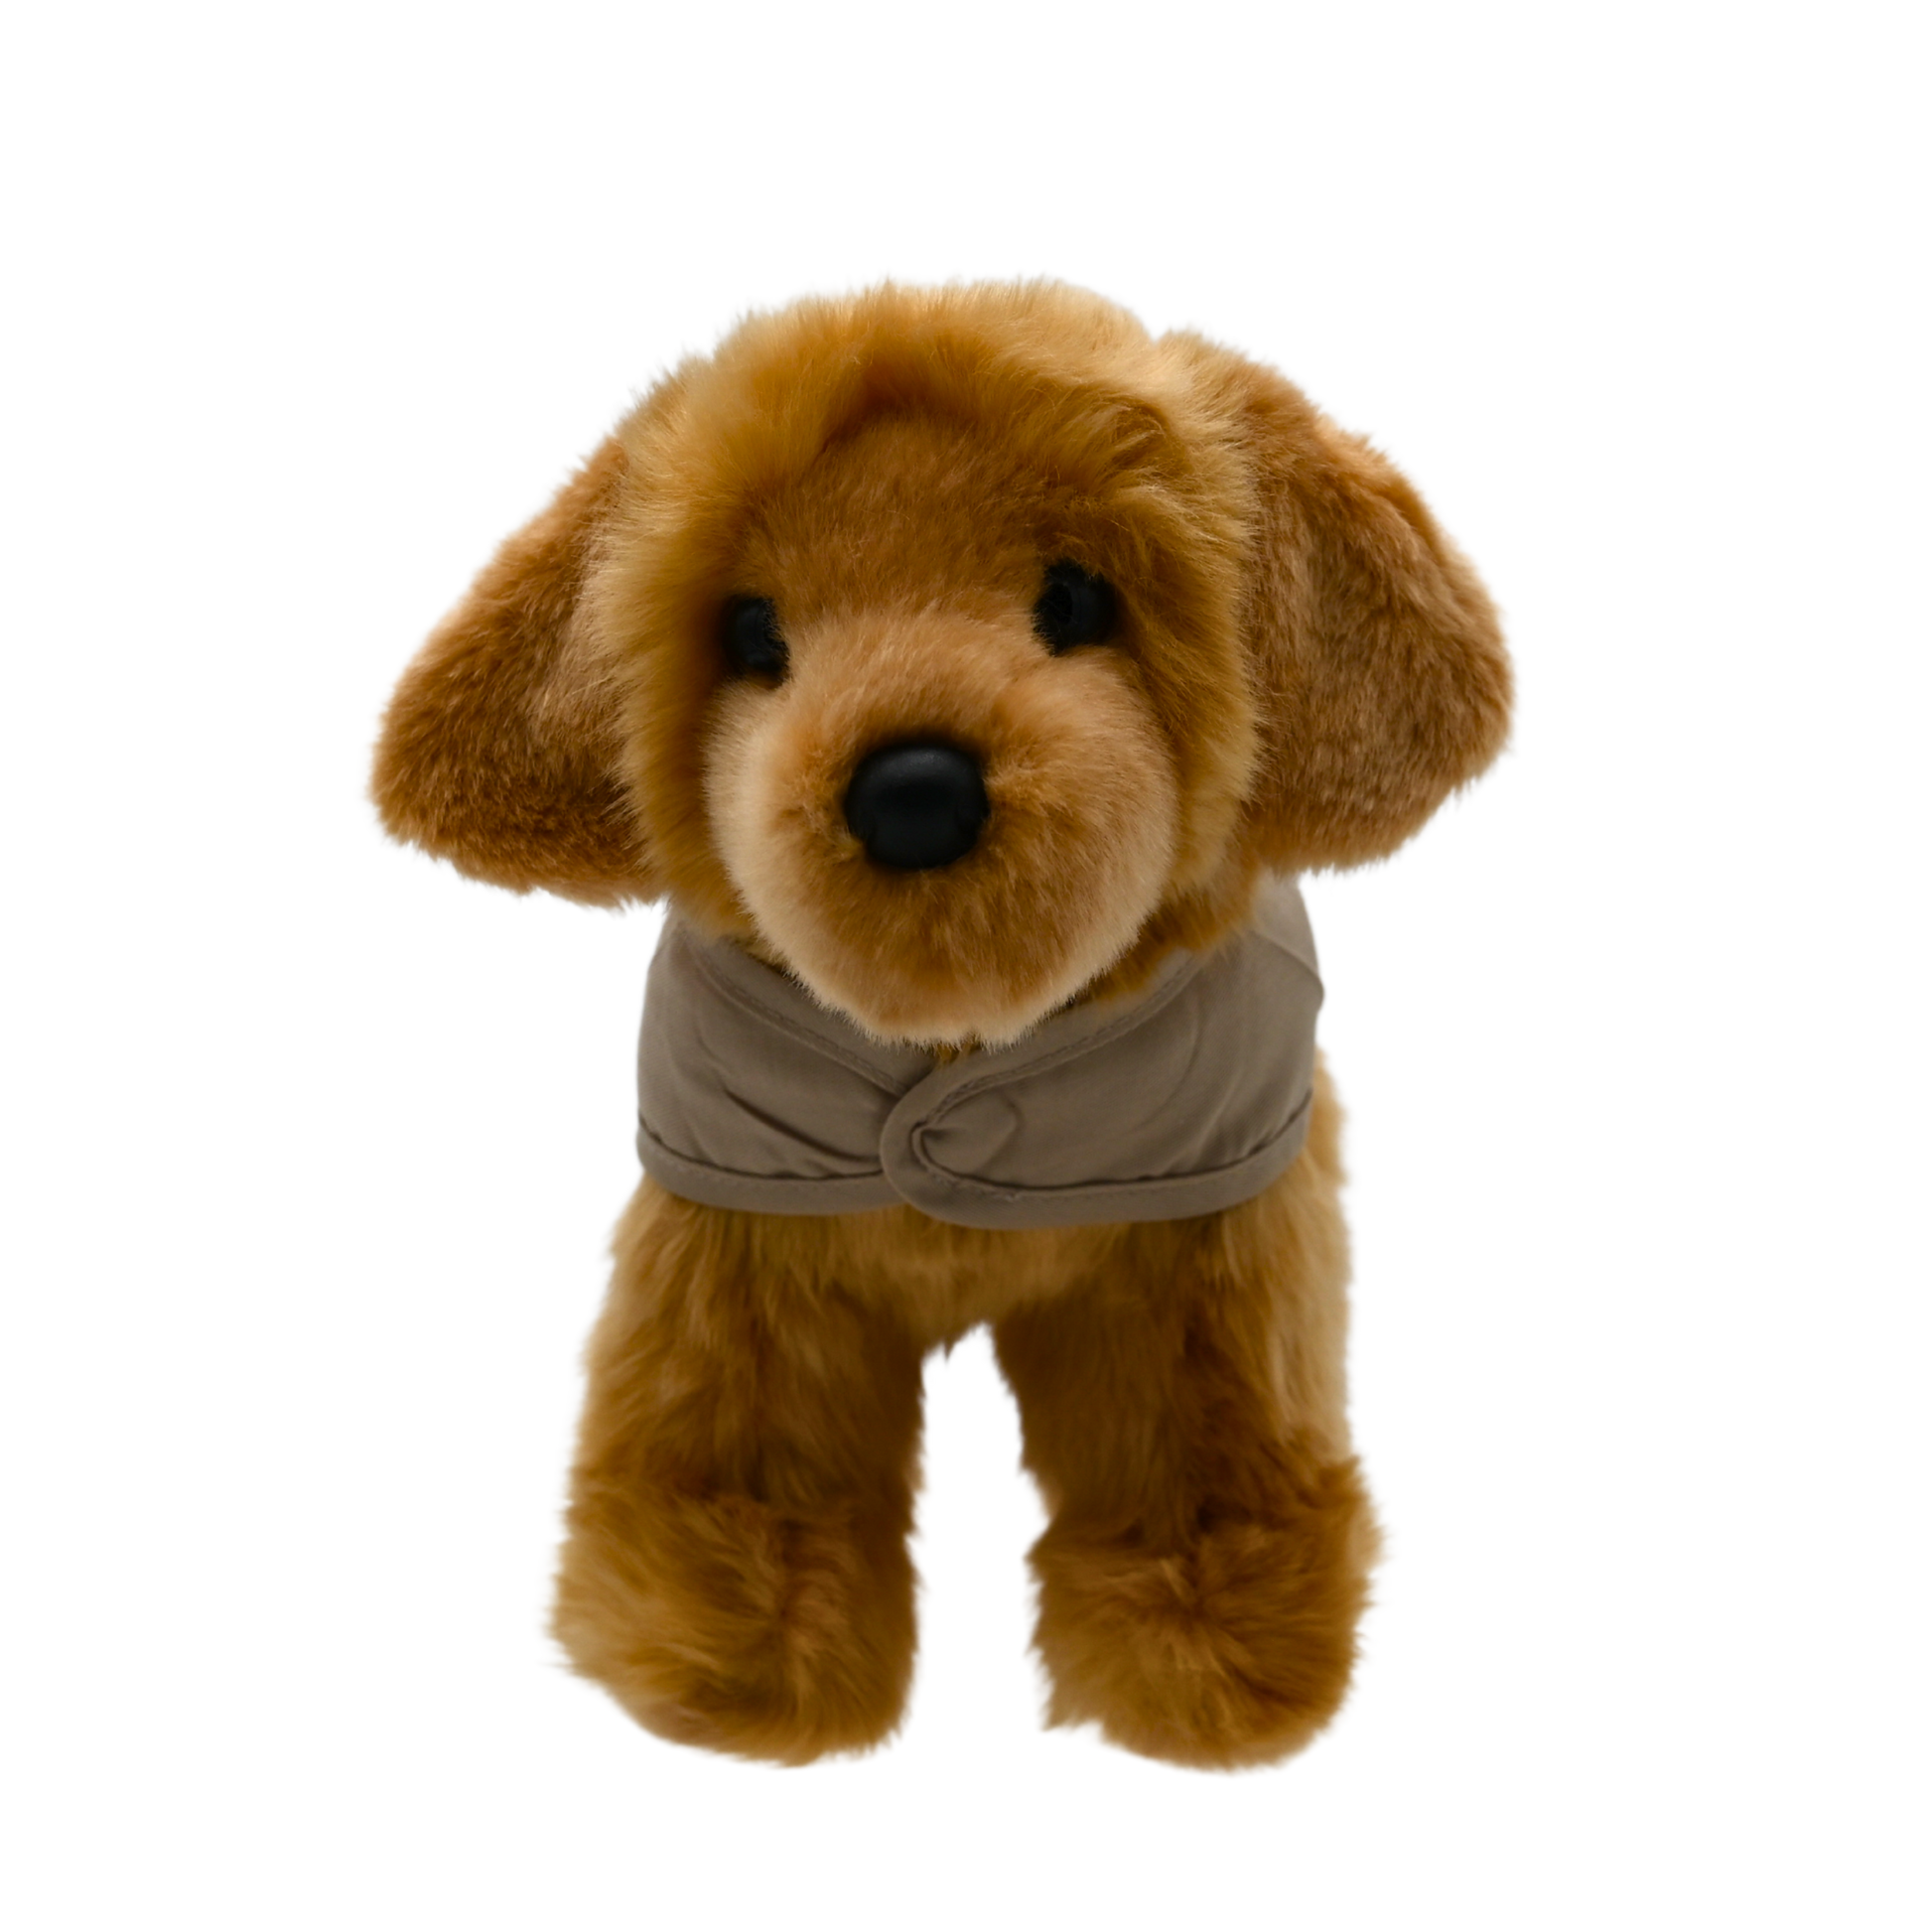  Introducing our 8-inch Golden Retriever Plush Puppy, a charming and lifelike companion captured in the image. Dressed in a tan vest adorned with the logos of America's VetDogs and the Guide Dog Foundation, this adorable plush not only boasts authenticity but also contributes to these noble organizations. With soft golden fur and a friendly expression, it's a heartwarming addition to any collection, combining cuddly charm with a meaningful cause.